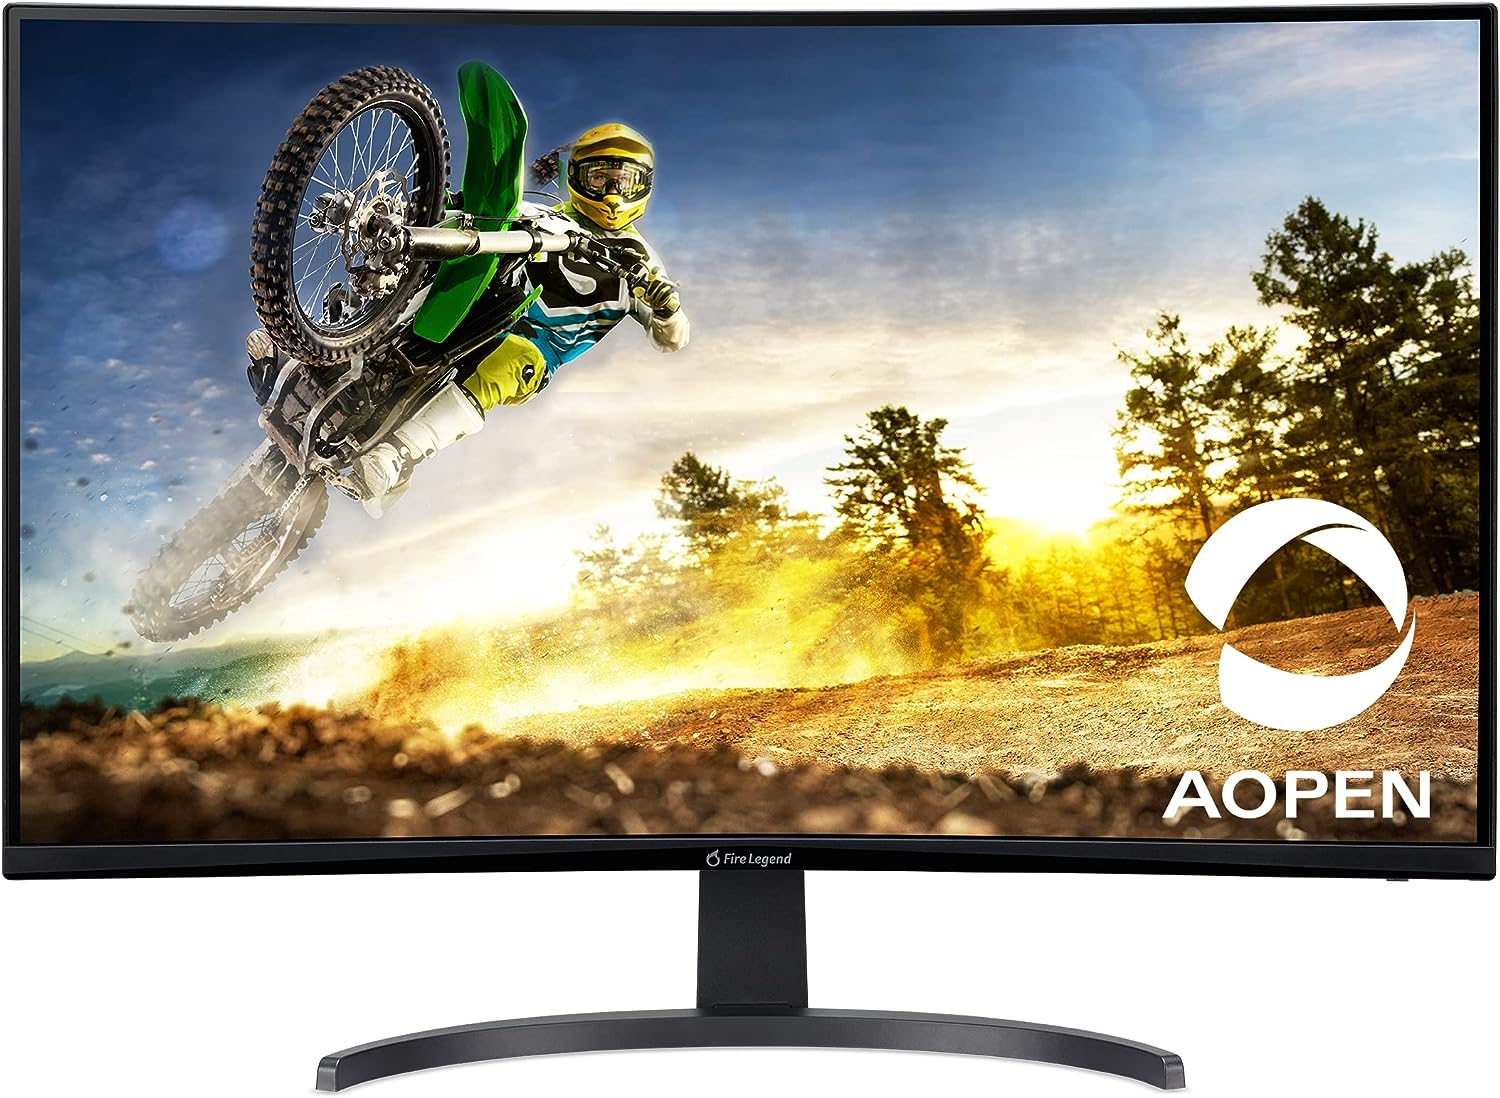 AOPEN 32HC5QR Sbiipx Gaming Monitor Review